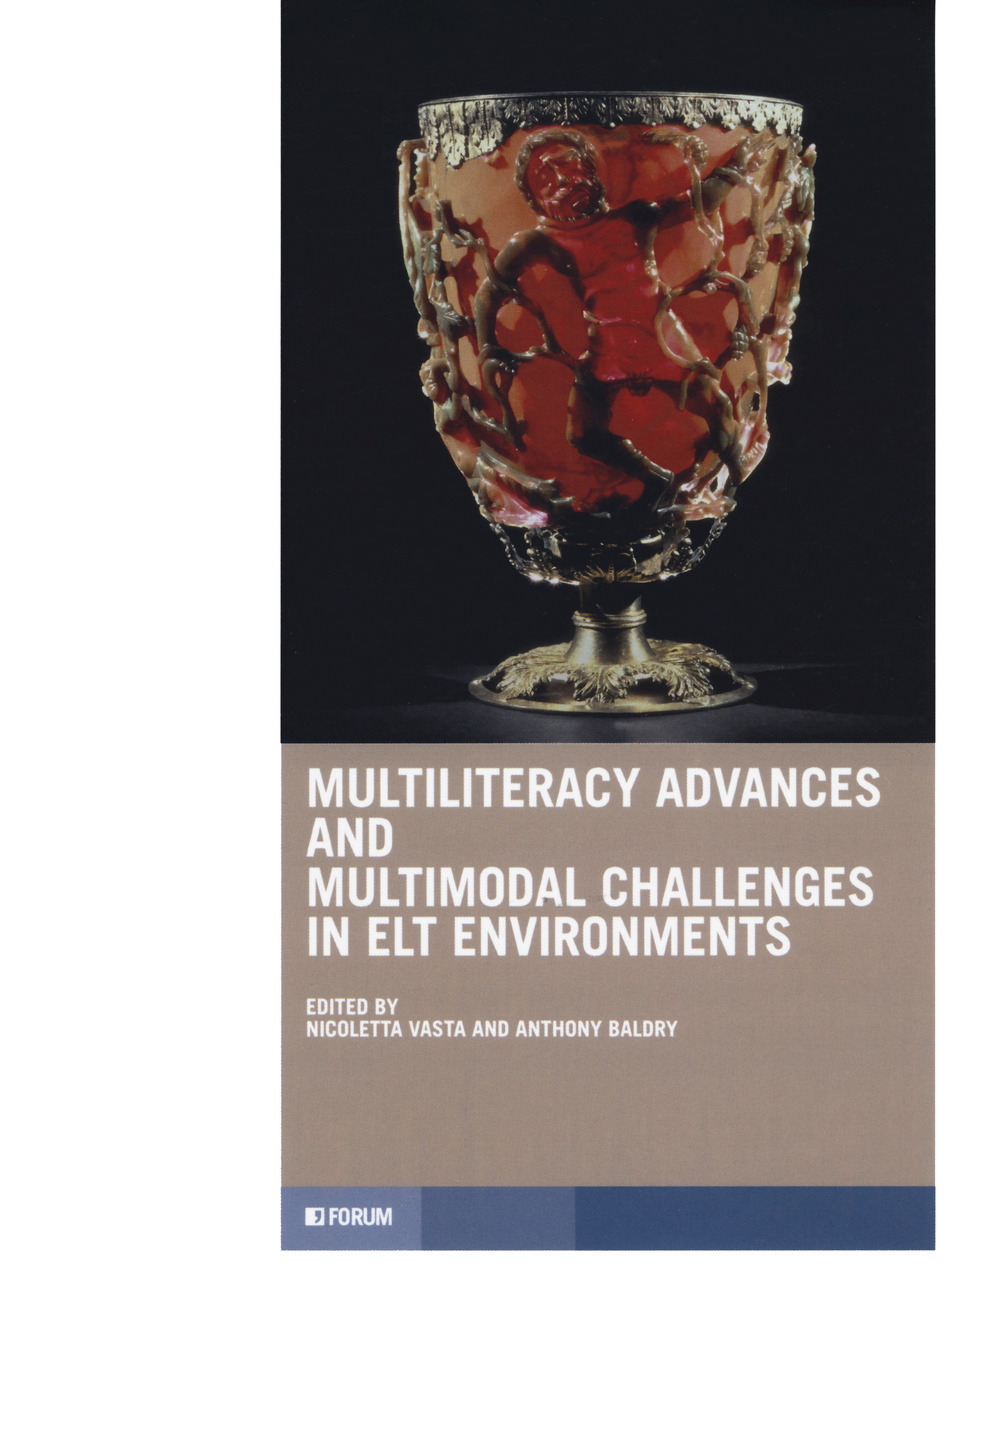 MULTILITERACY ADVANCES AND CHALLENGES IN ELT ENVIRONMENTS - 9788832831535